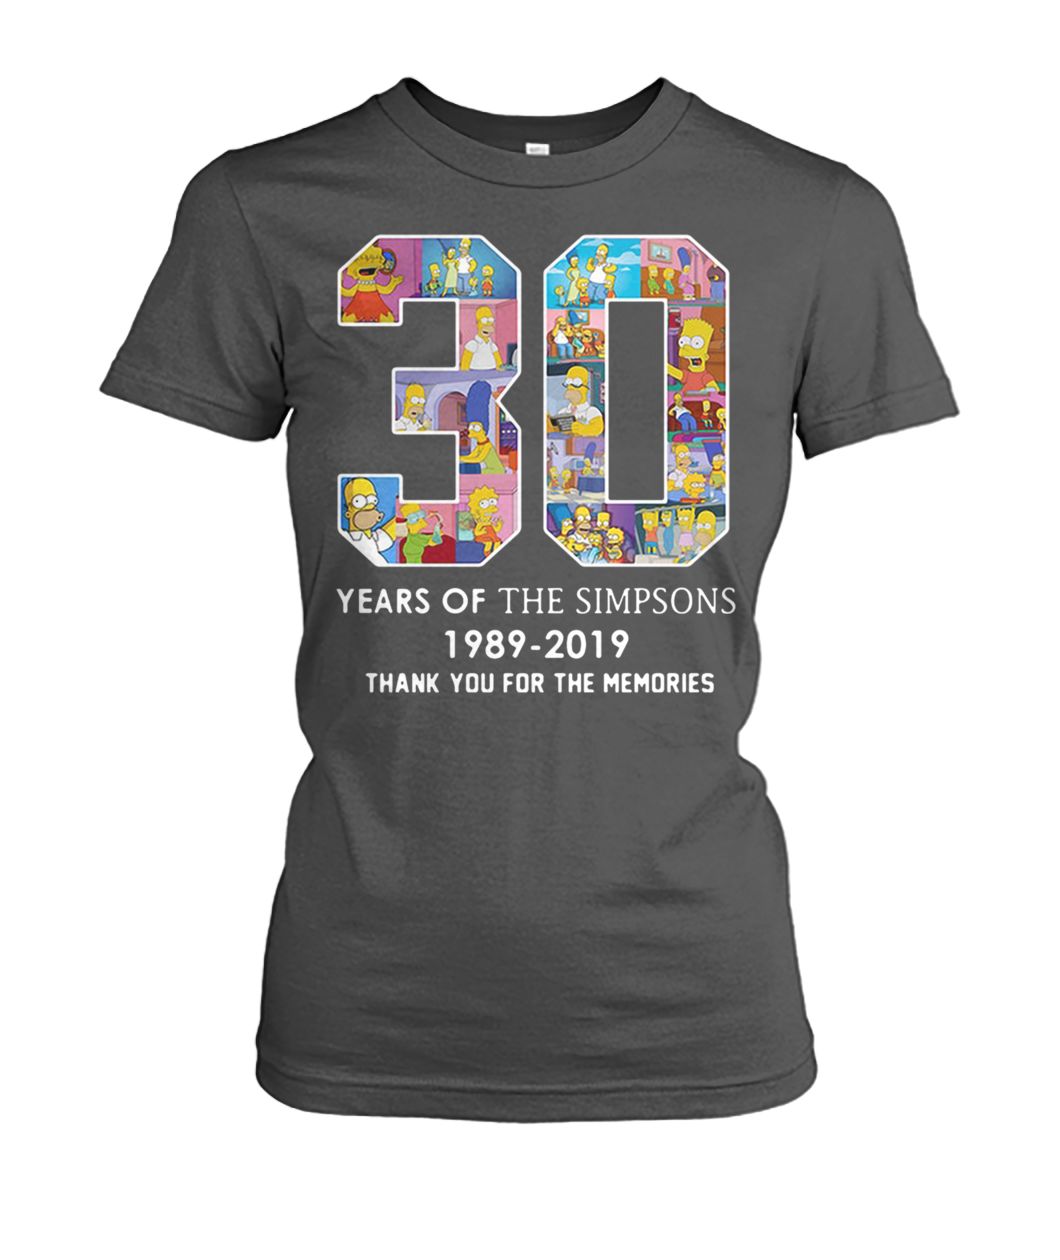 30 years of the Simpsons 1989 2019 thank you for the memories women's crew tee